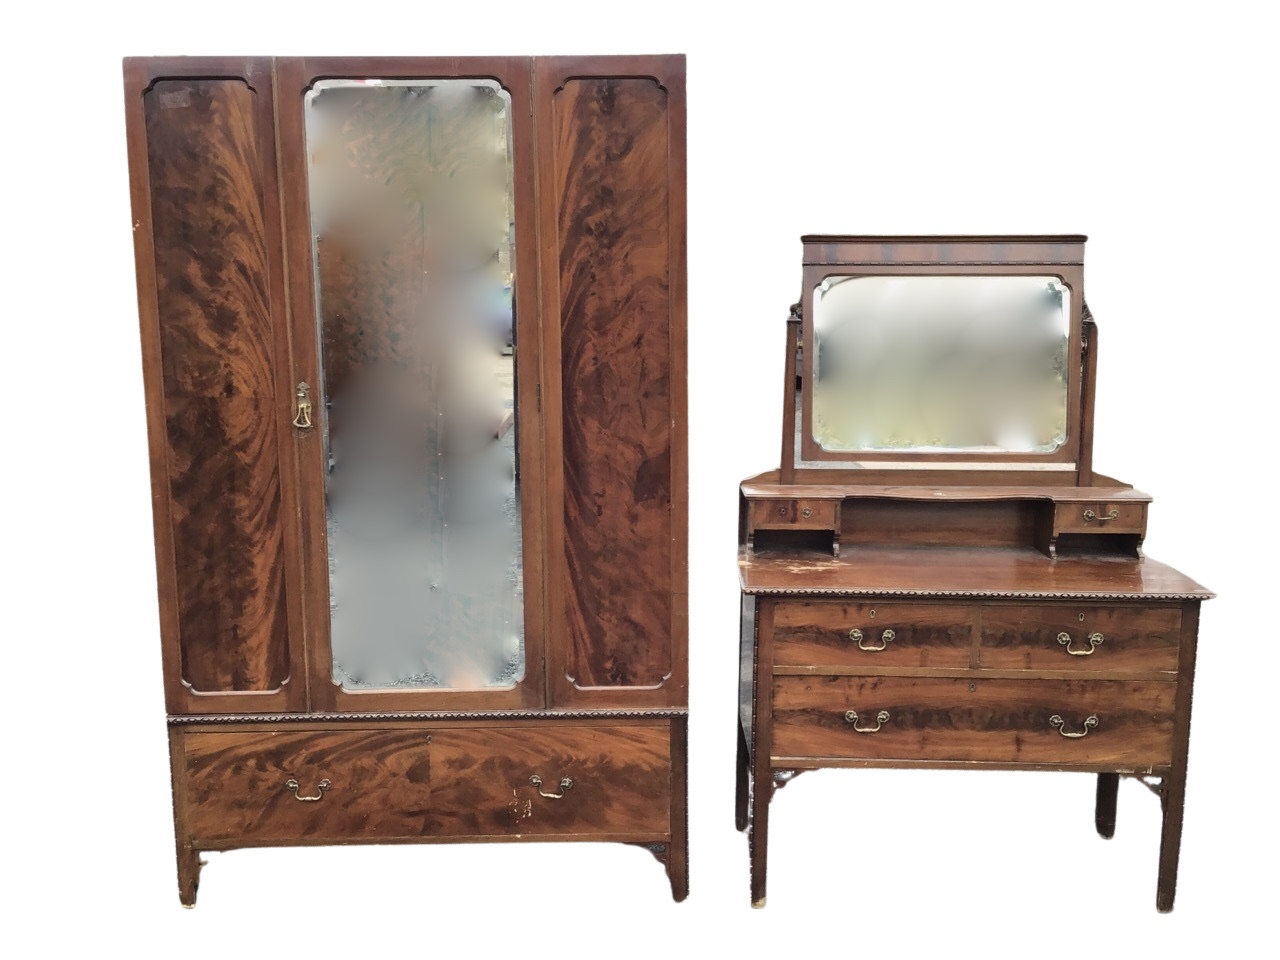 An Edwardian mahogany dressing table and wardrobe, the chest with bevelled mirror on tapering